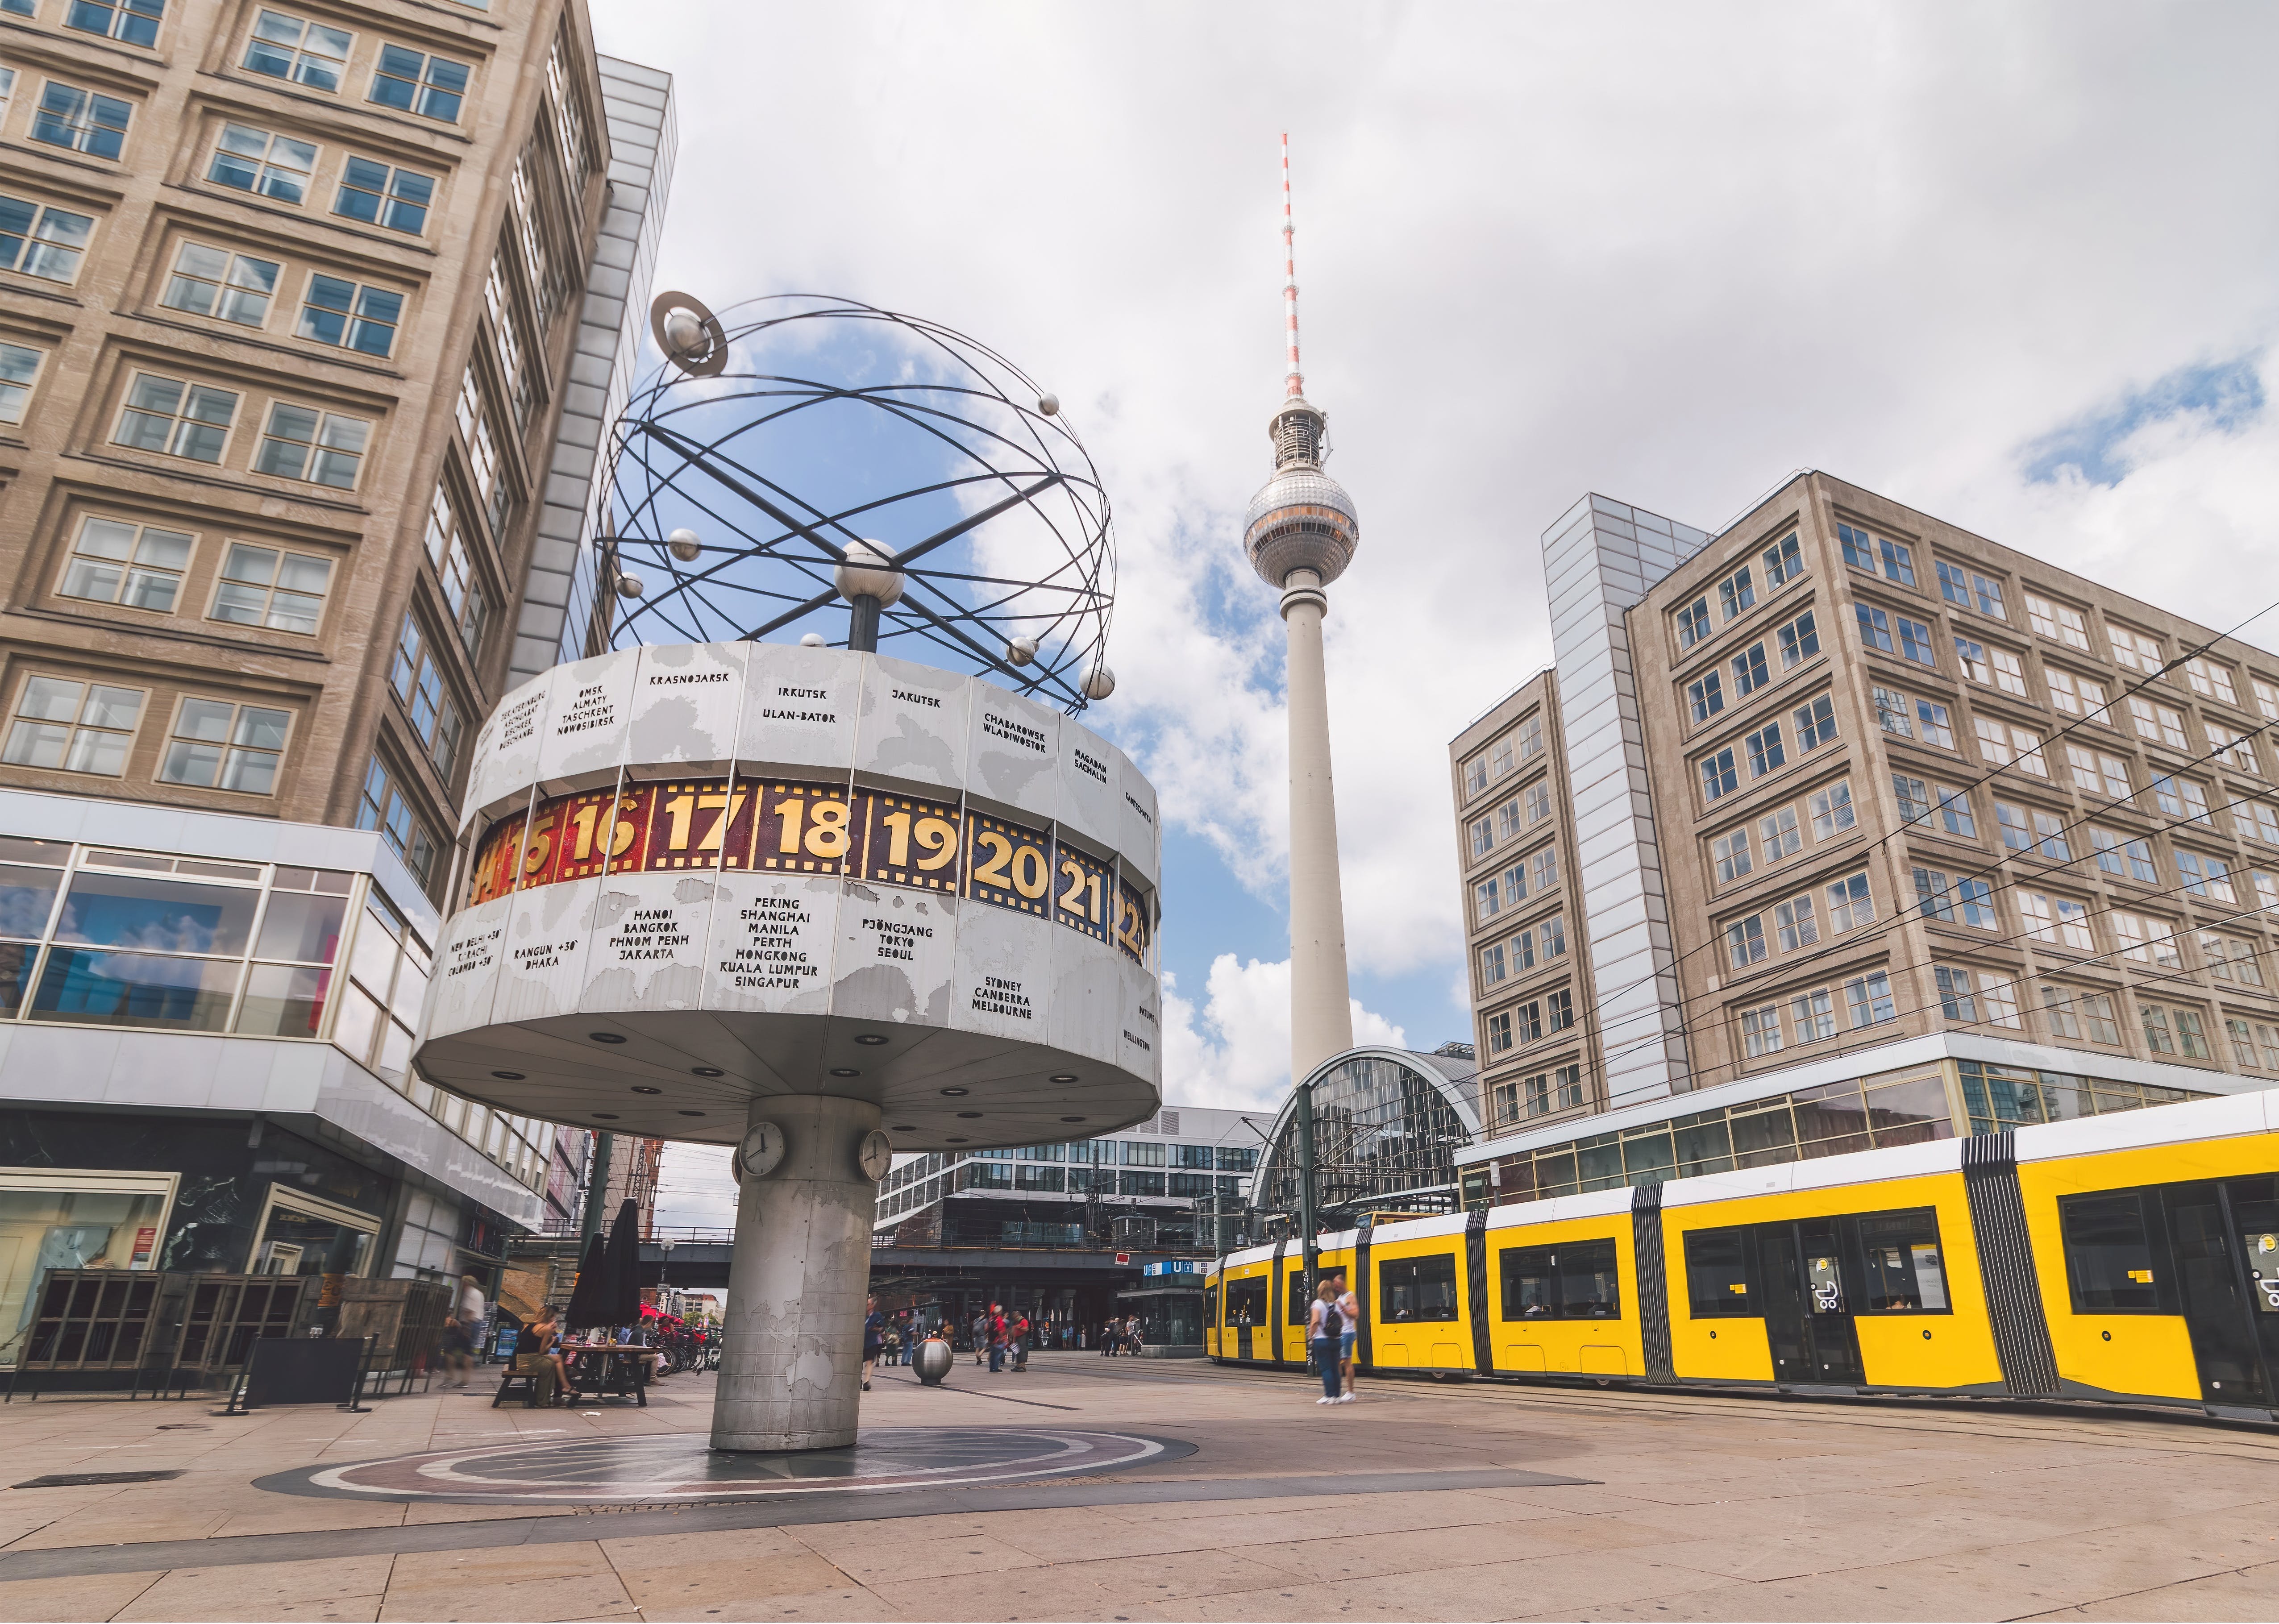 image is of the world clock in Alexanderplatz with a yellow tram on the right-hand side of the image